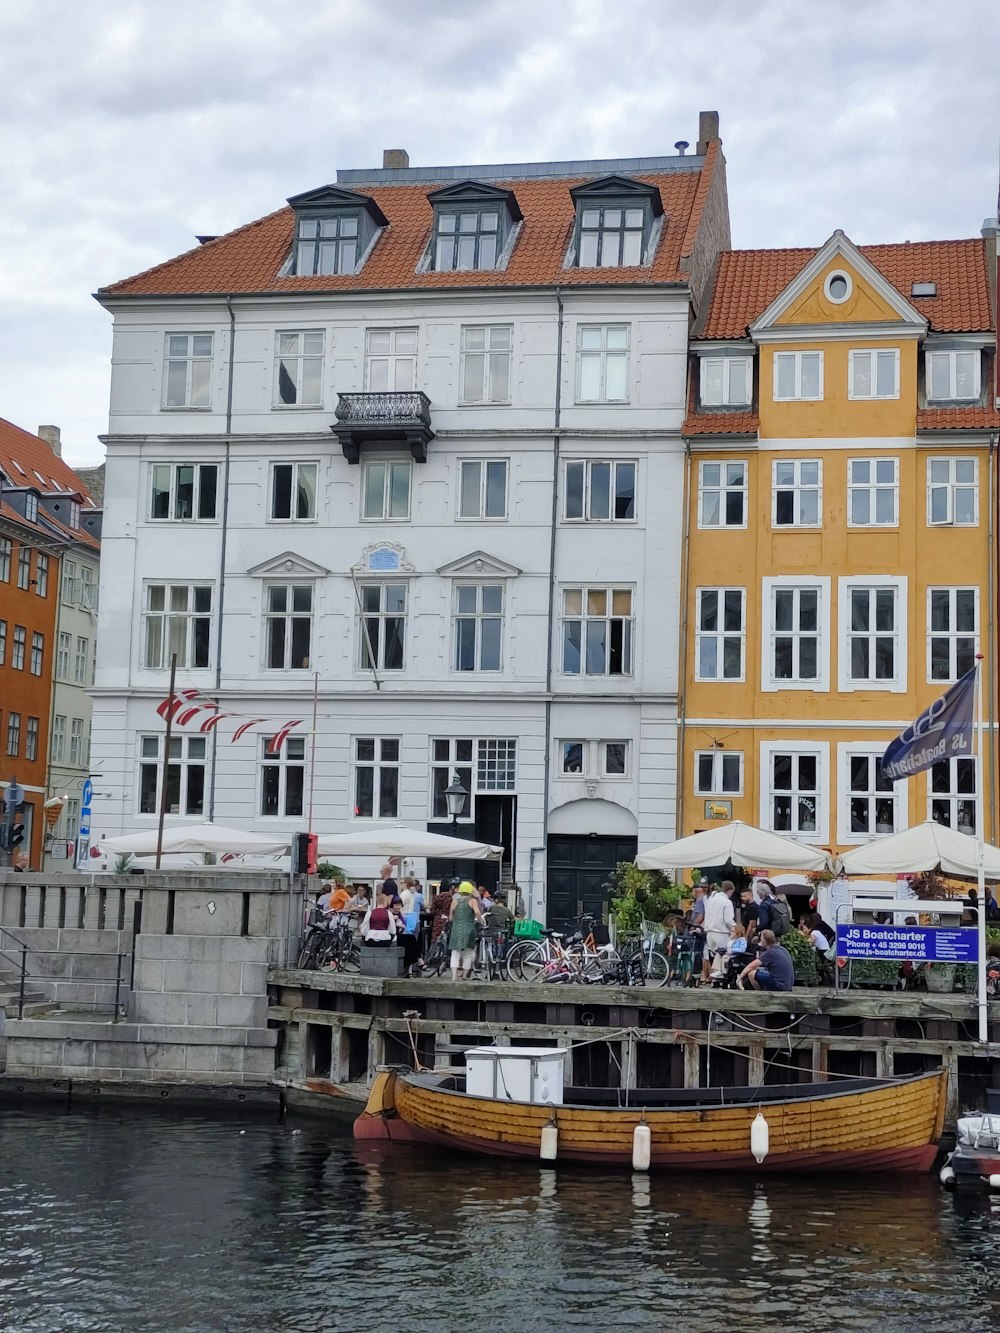 a boat is docked in front of a row of buildings